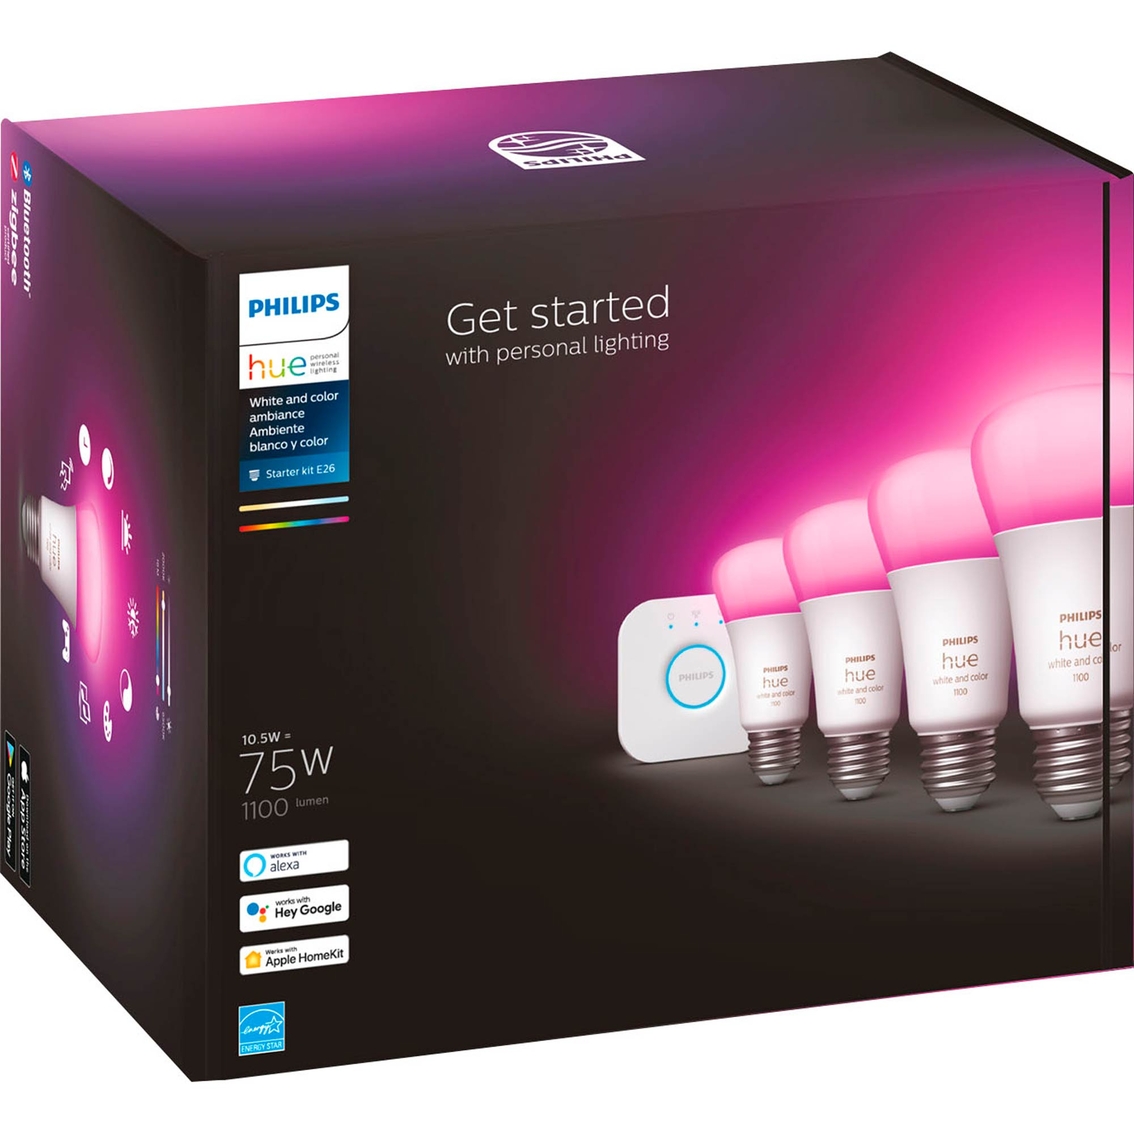 Philips Hue White and Color Ambiance A19 Bluetooth 75W Smart LED Starter Kit - Image 2 of 7